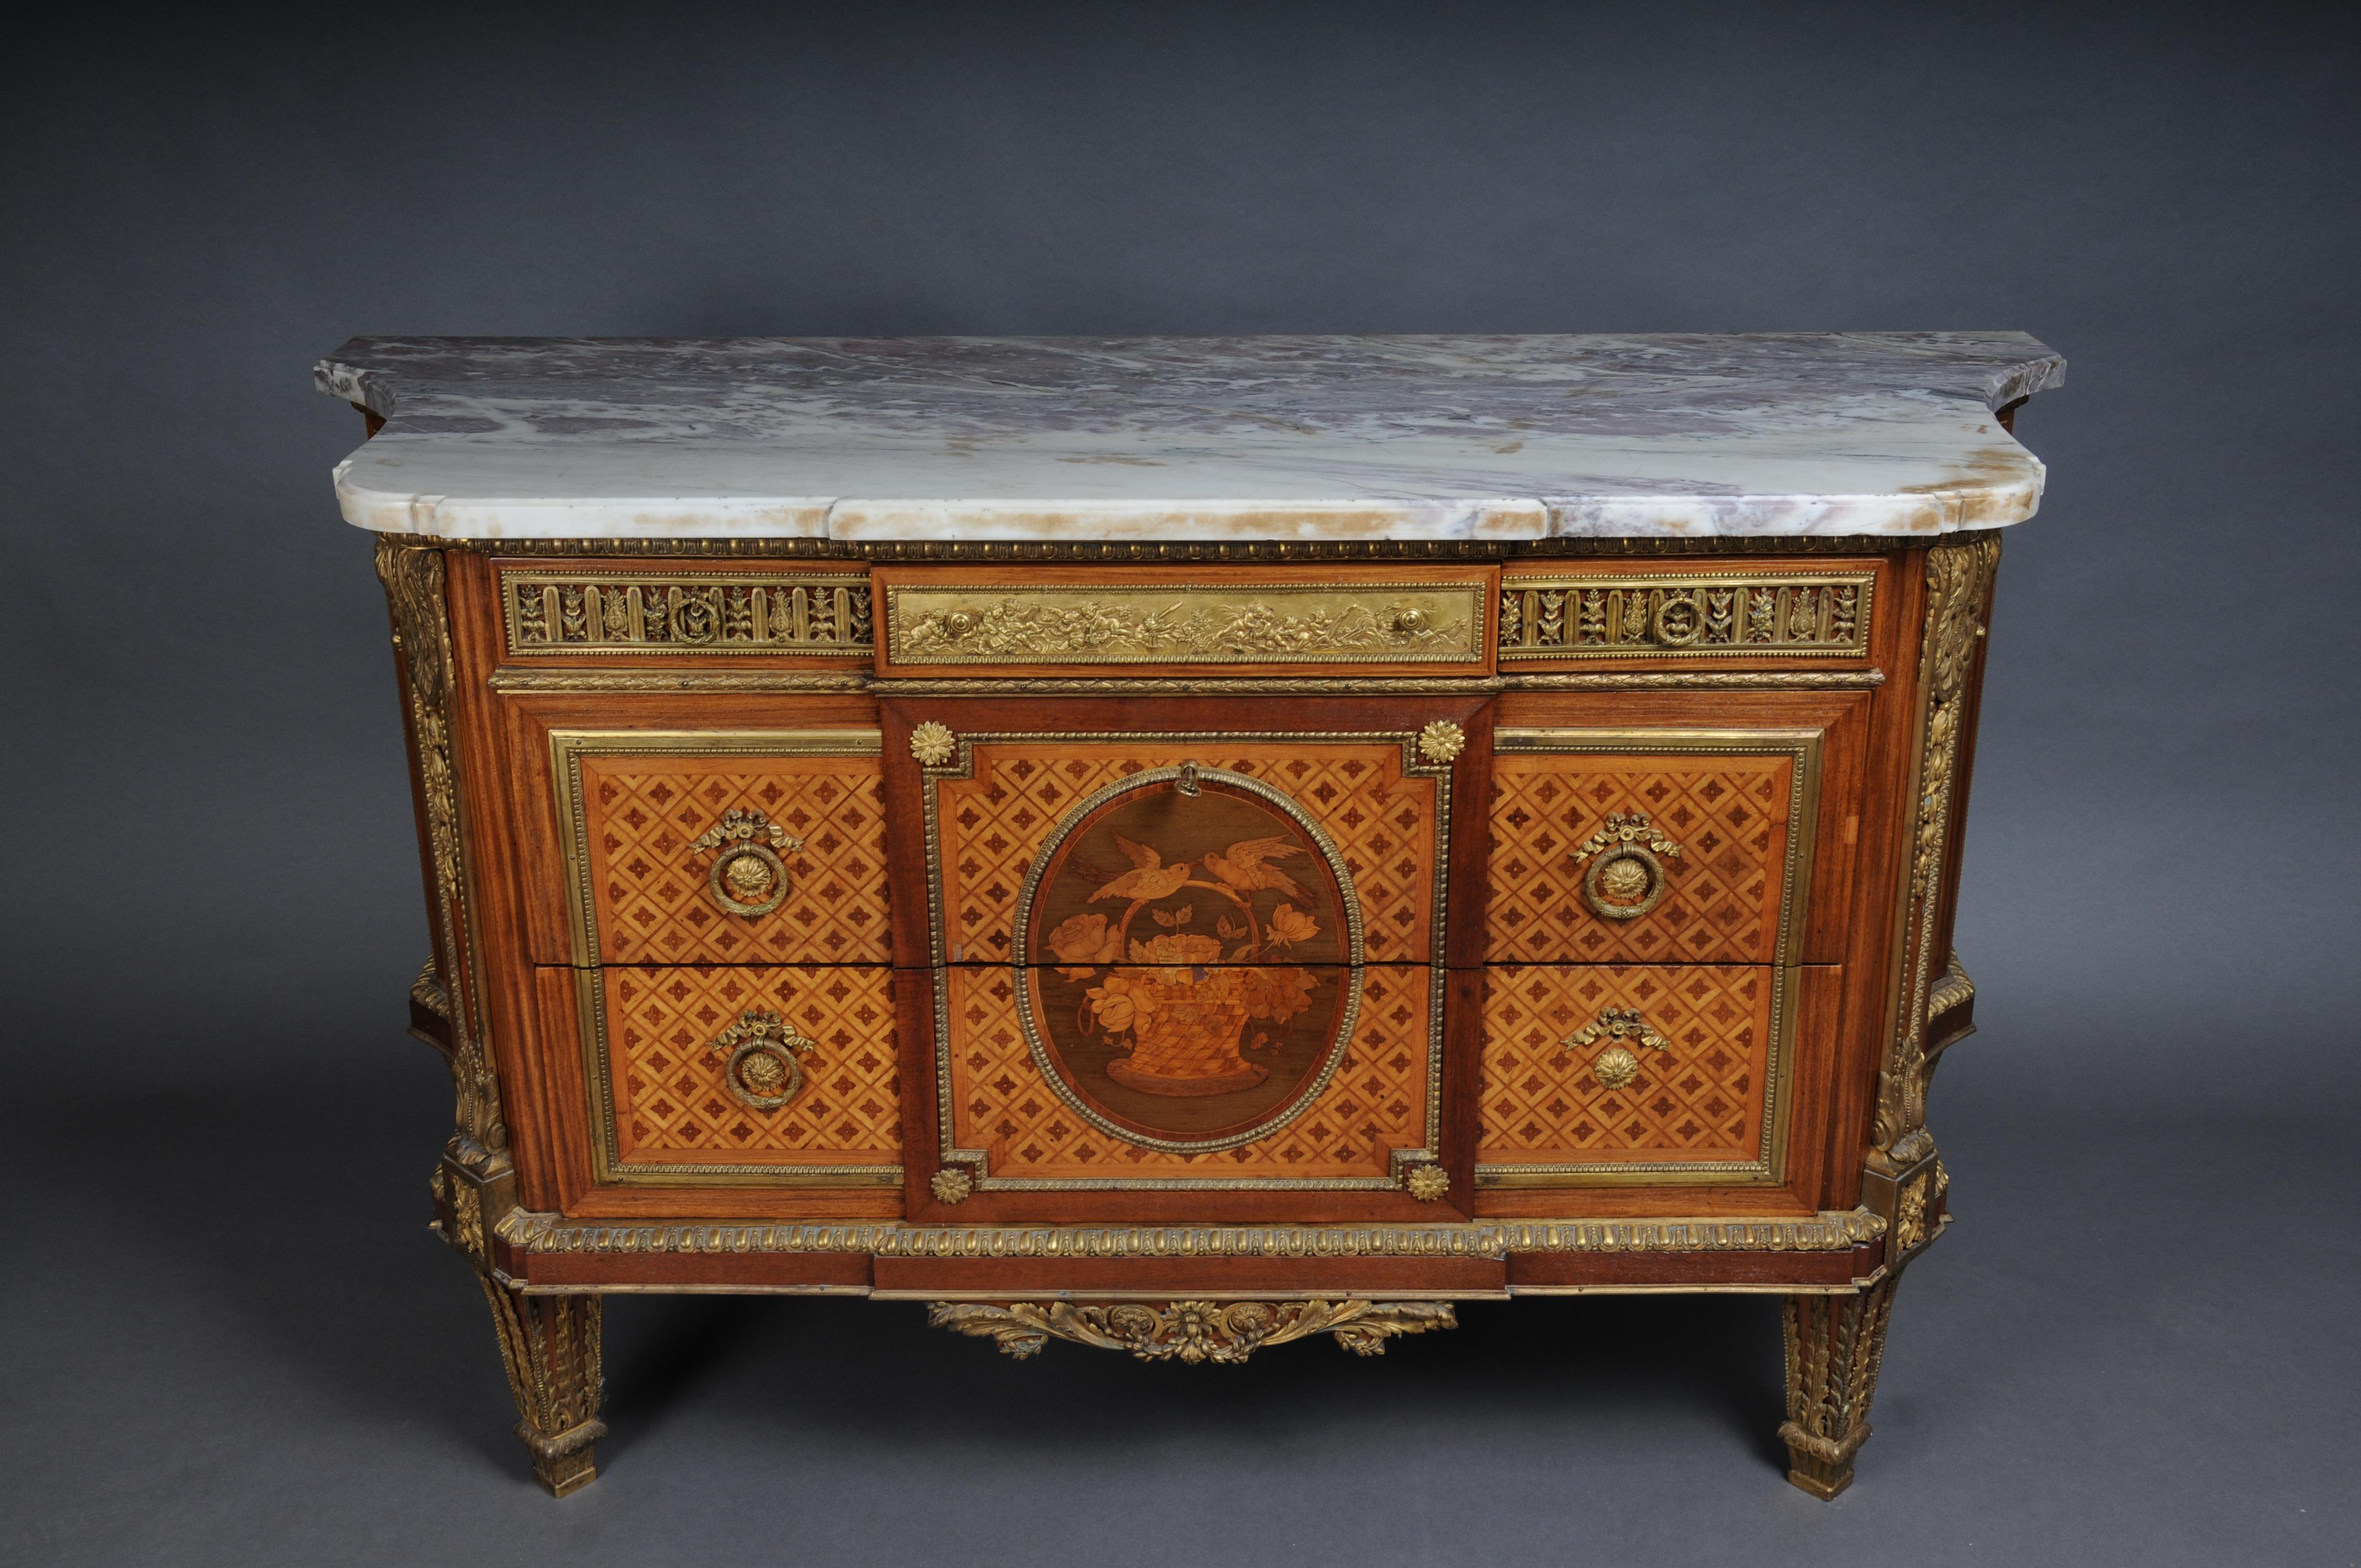 Royal antique pomp chest of drawers after J. Henri Riesener, Paris from 1880, gilded bronze

Various precious woods, veneered on a solid oak body. In the center marquetry in the form of stylized flowers and a pair of birds on a flower basket.